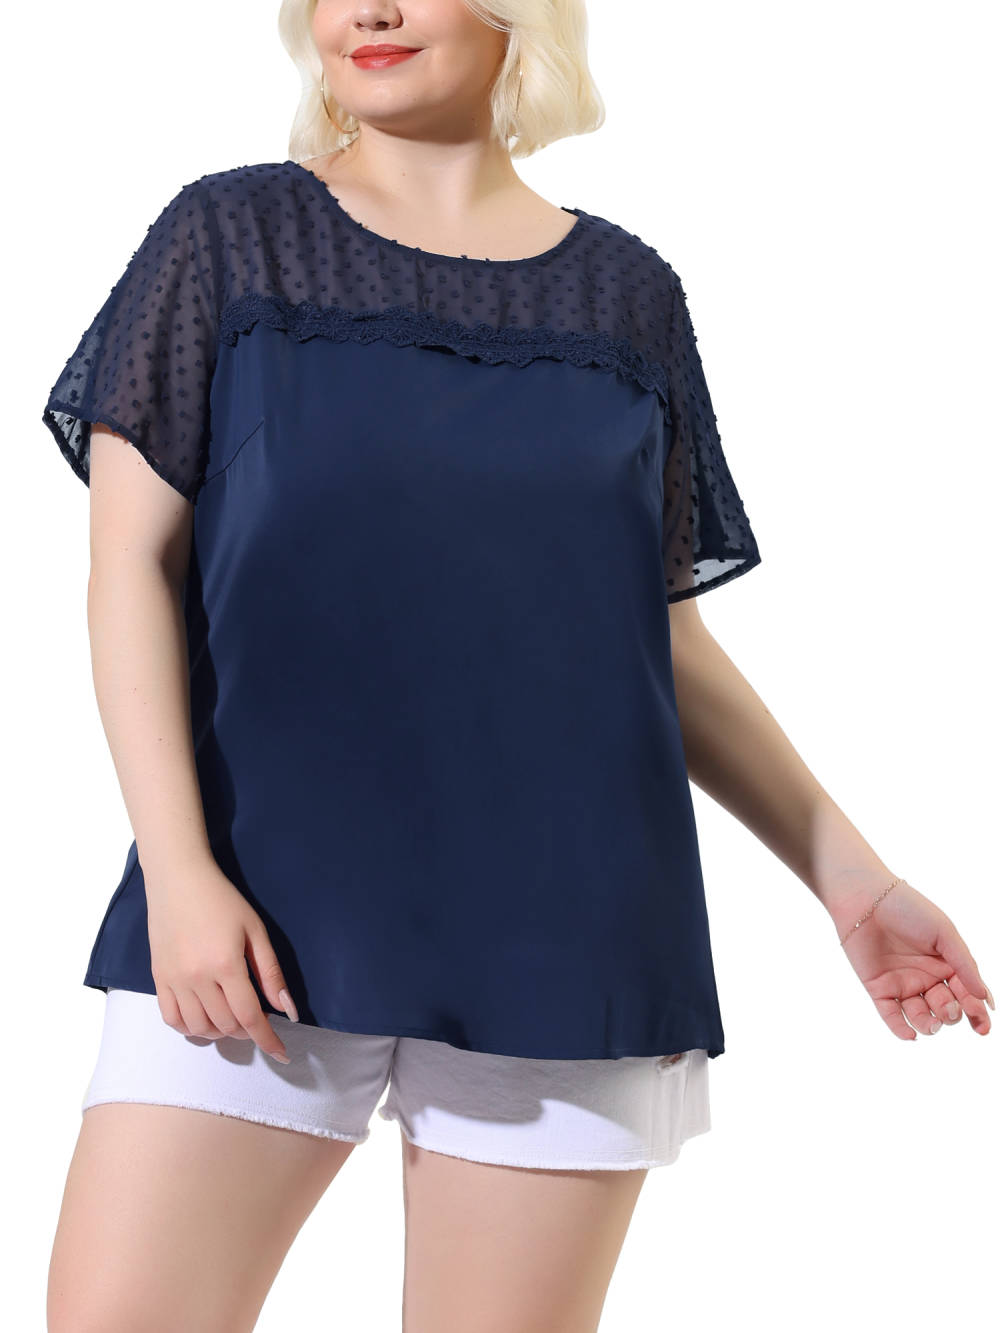 Agnes Orinda - Swiss Dots Short Sleeves Lace Panel Casual Tops